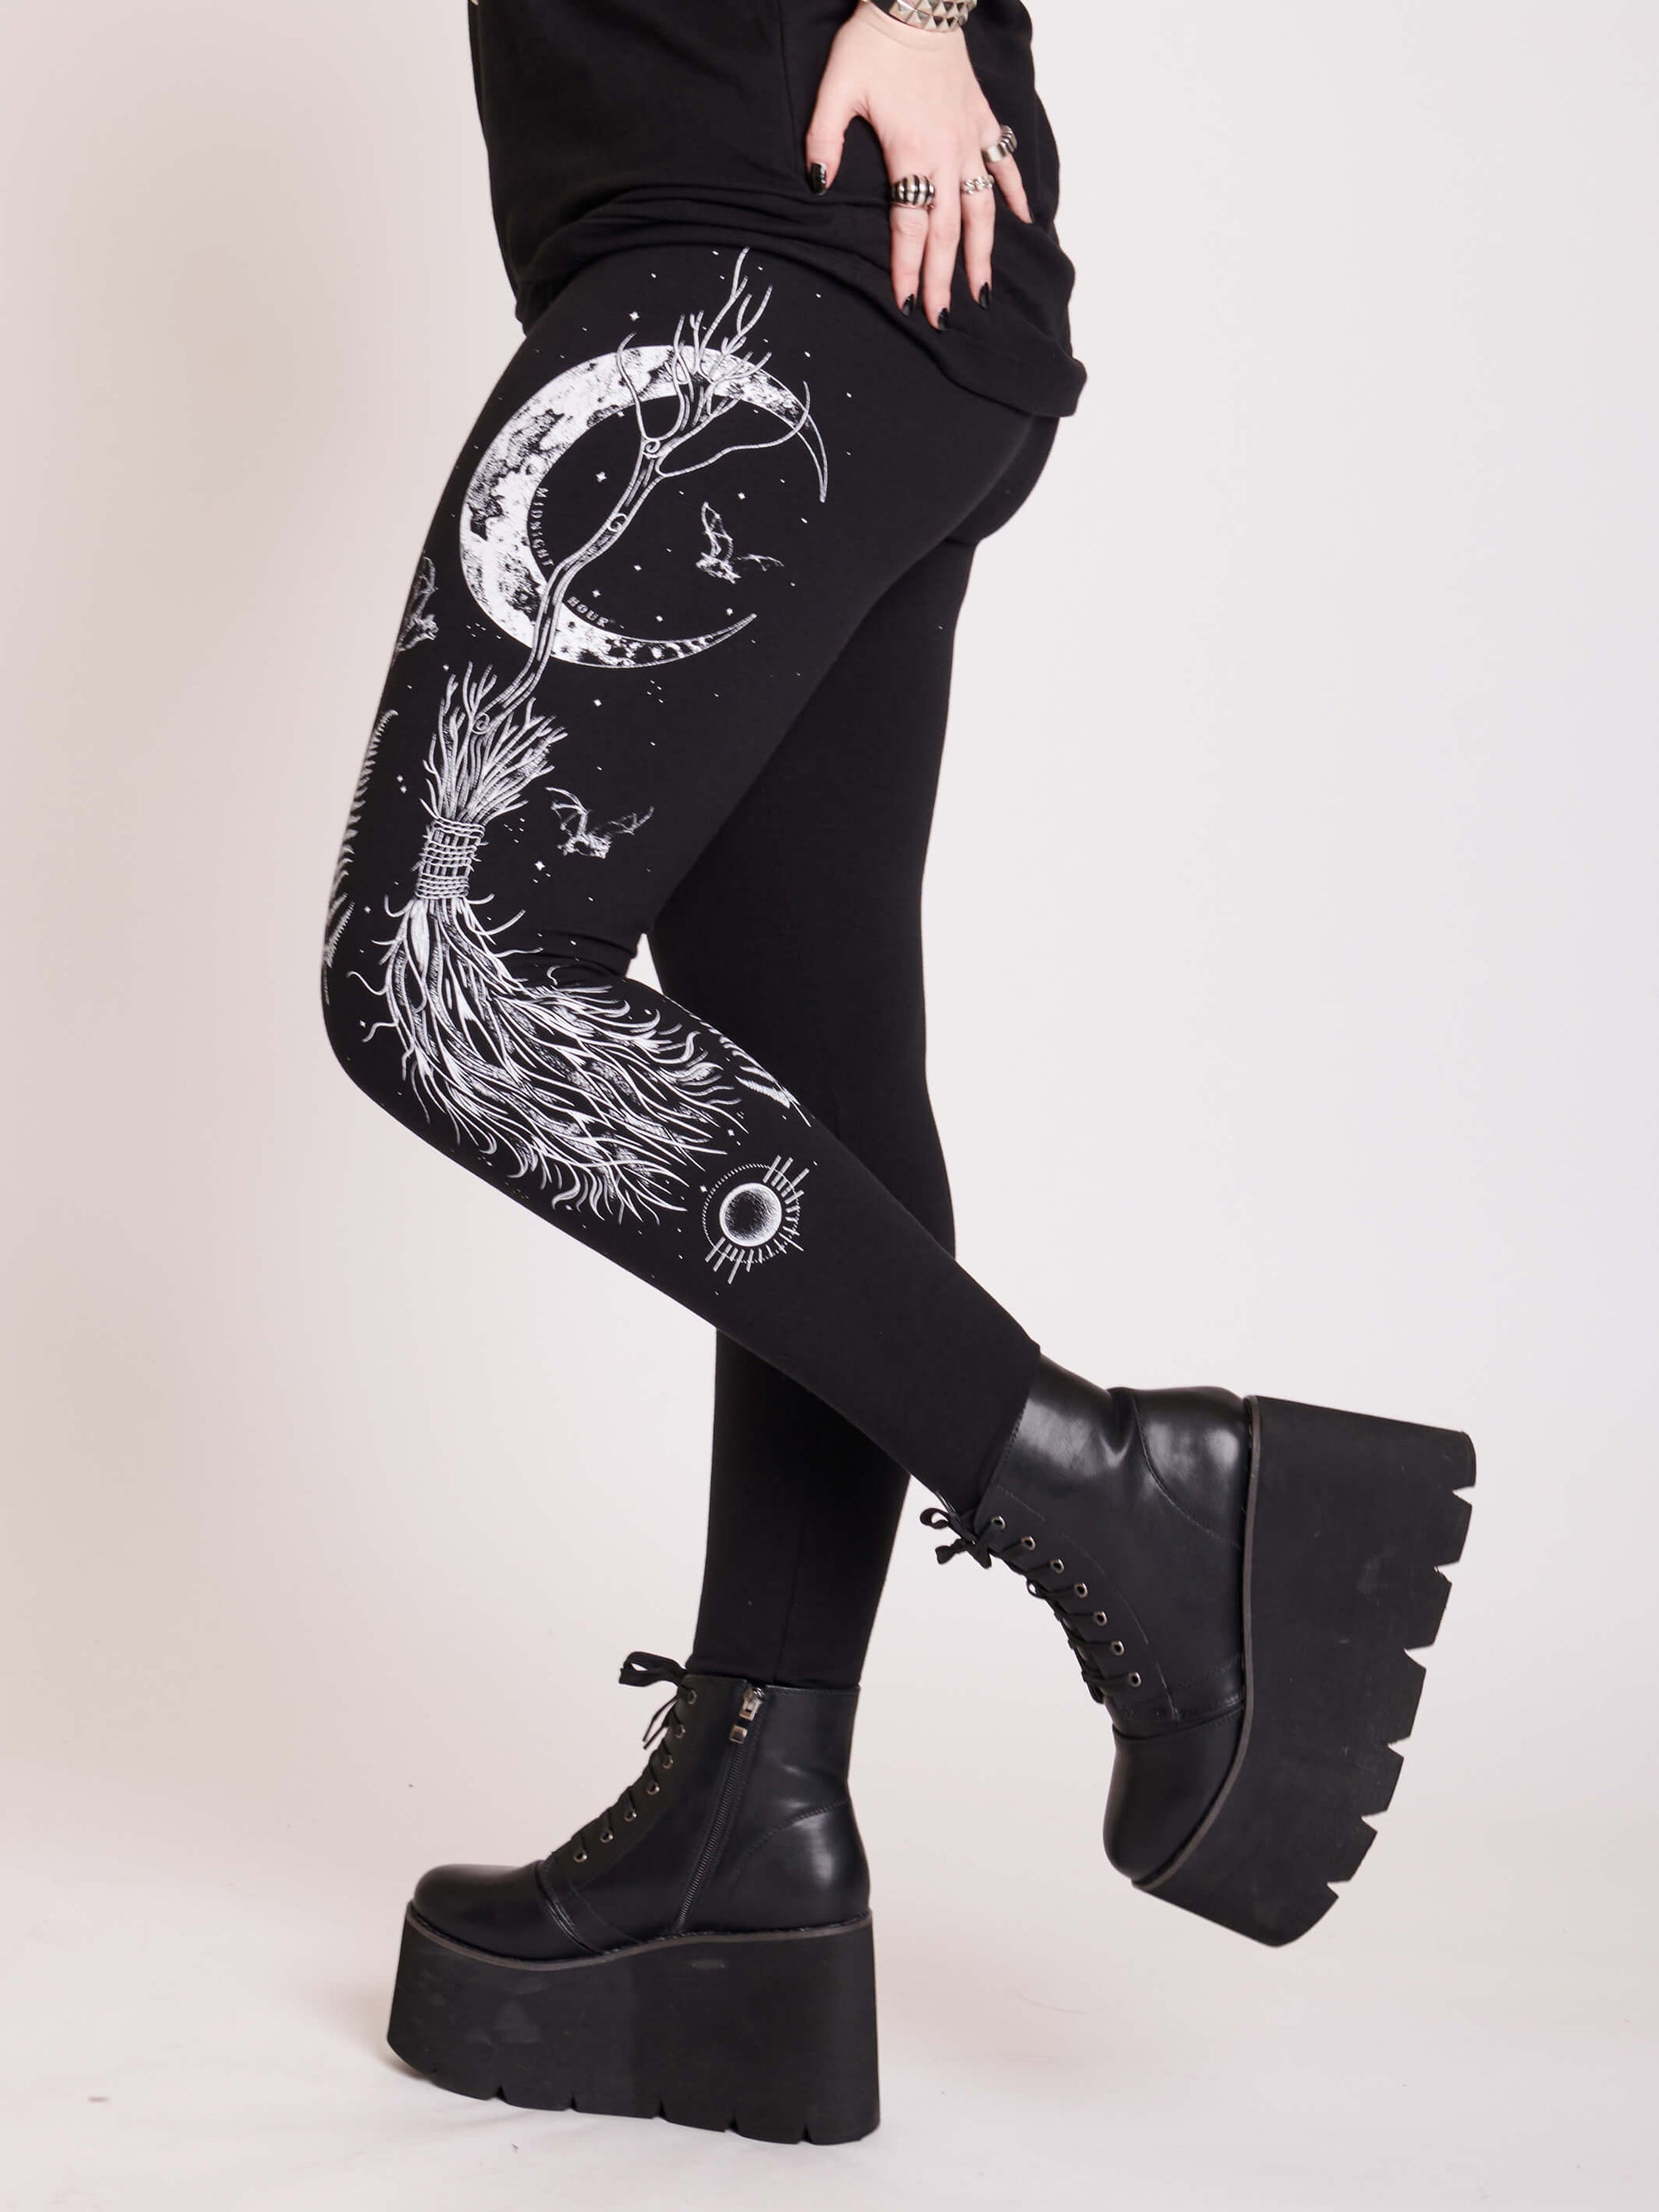 Witchy broom stick graphic on black leggings